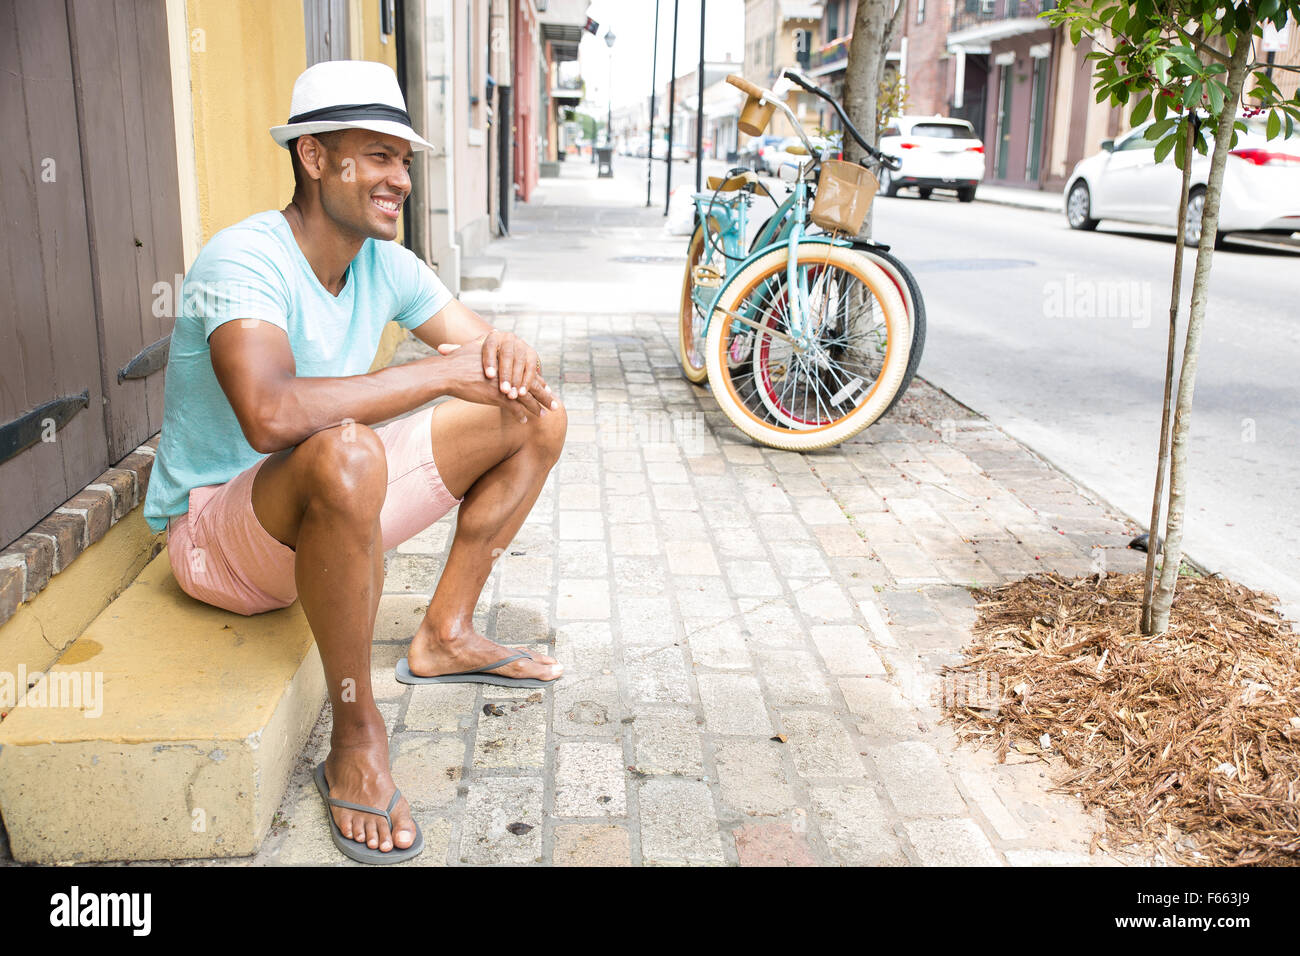 Portrait of an ethnic man smiling wearing a light blue green t-shirt and black and white fedora with a bicycle in th background. Stock Photo